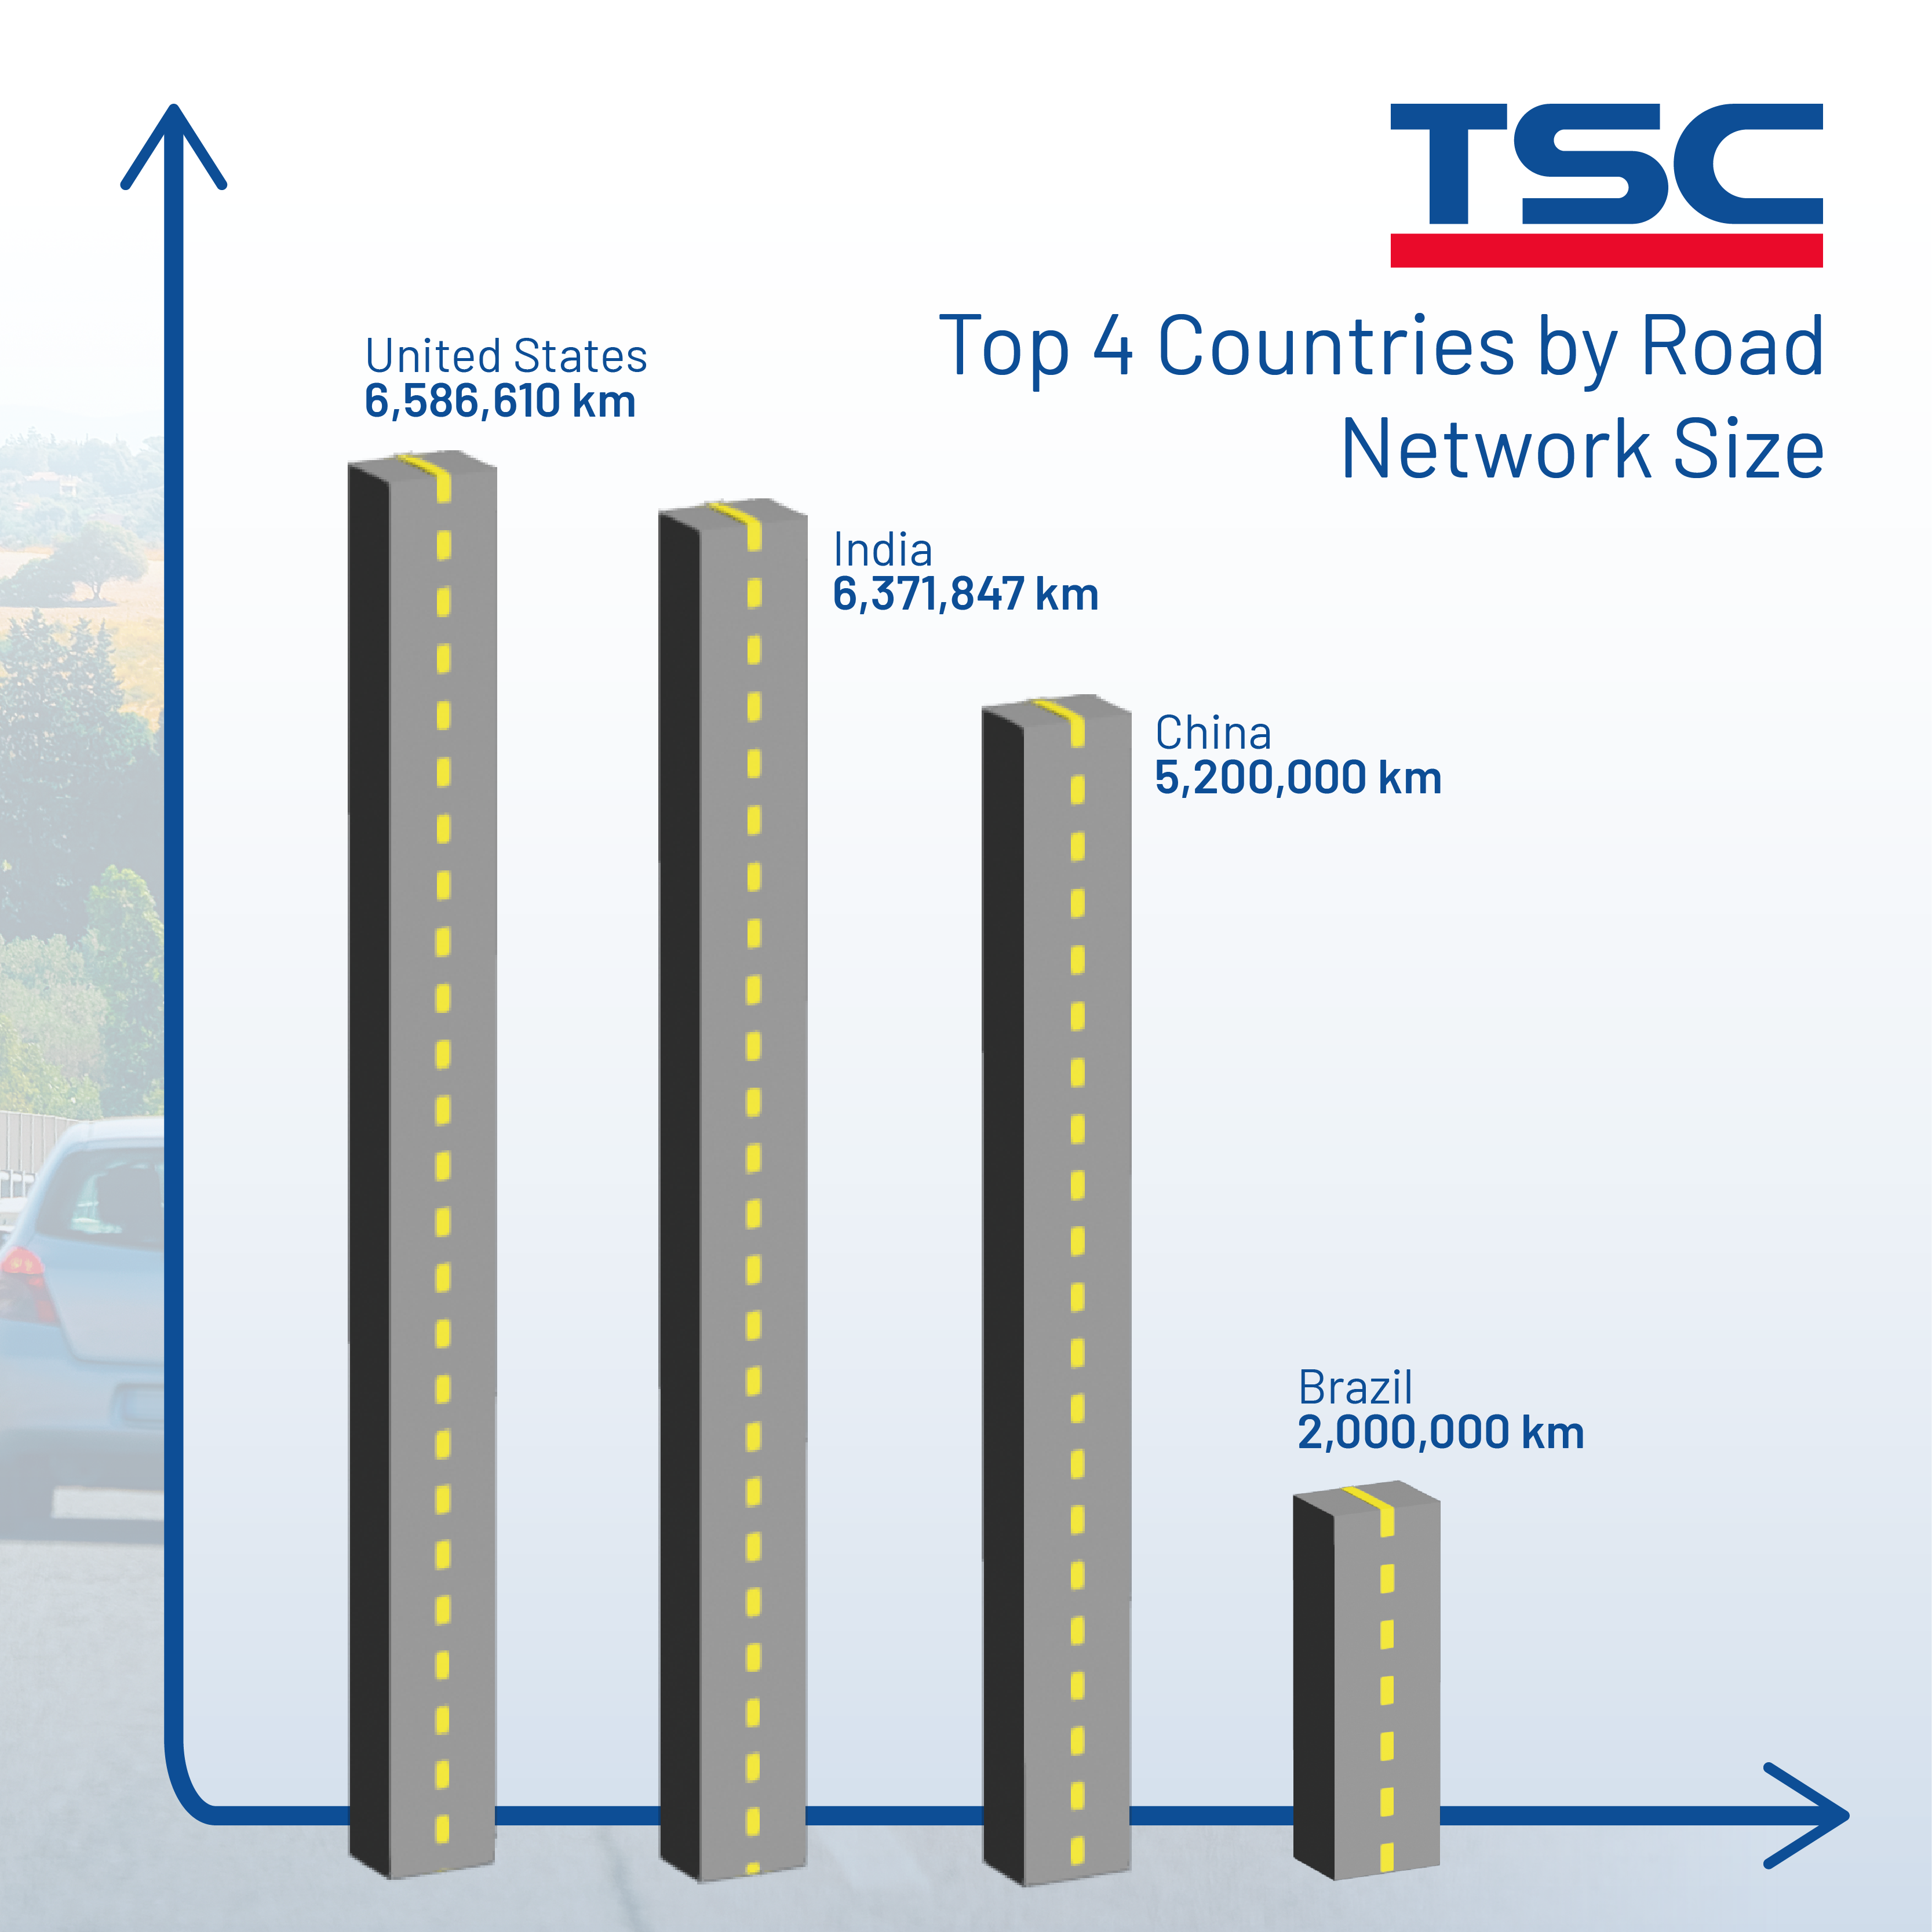 TSC Auto ID Top 4 Countries by Road Network Size